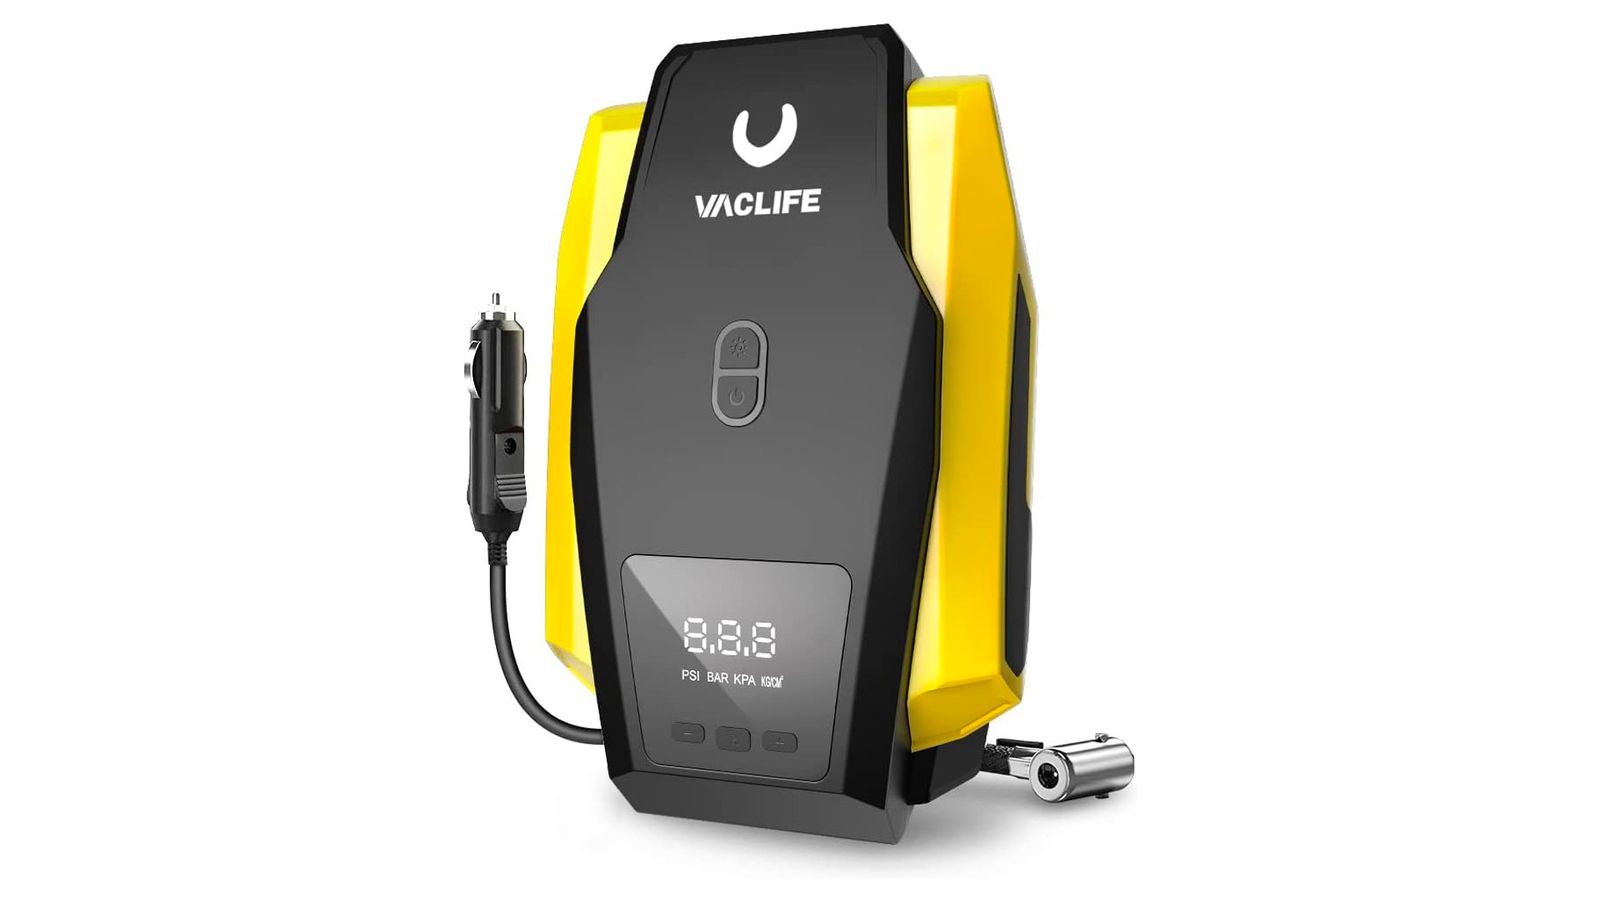 VacLife Tyre Inflator Portable Air Compressor product image of a compact black and yellow machine with white VacLife branding.